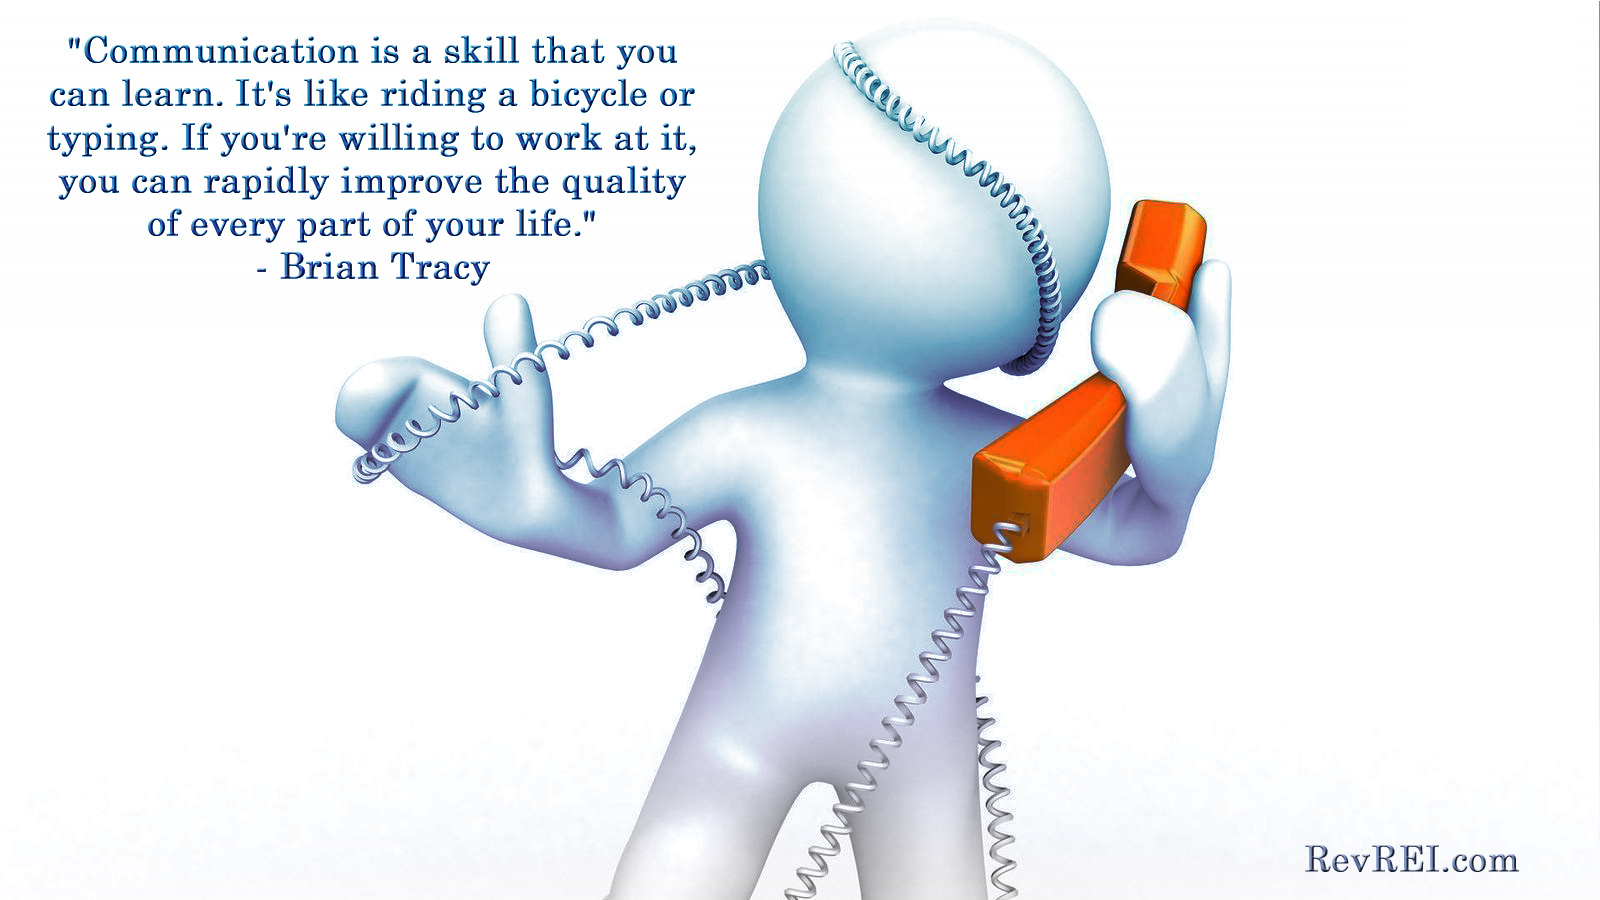 Quality Work Inspiration Quote For Work - HD Wallpaper 